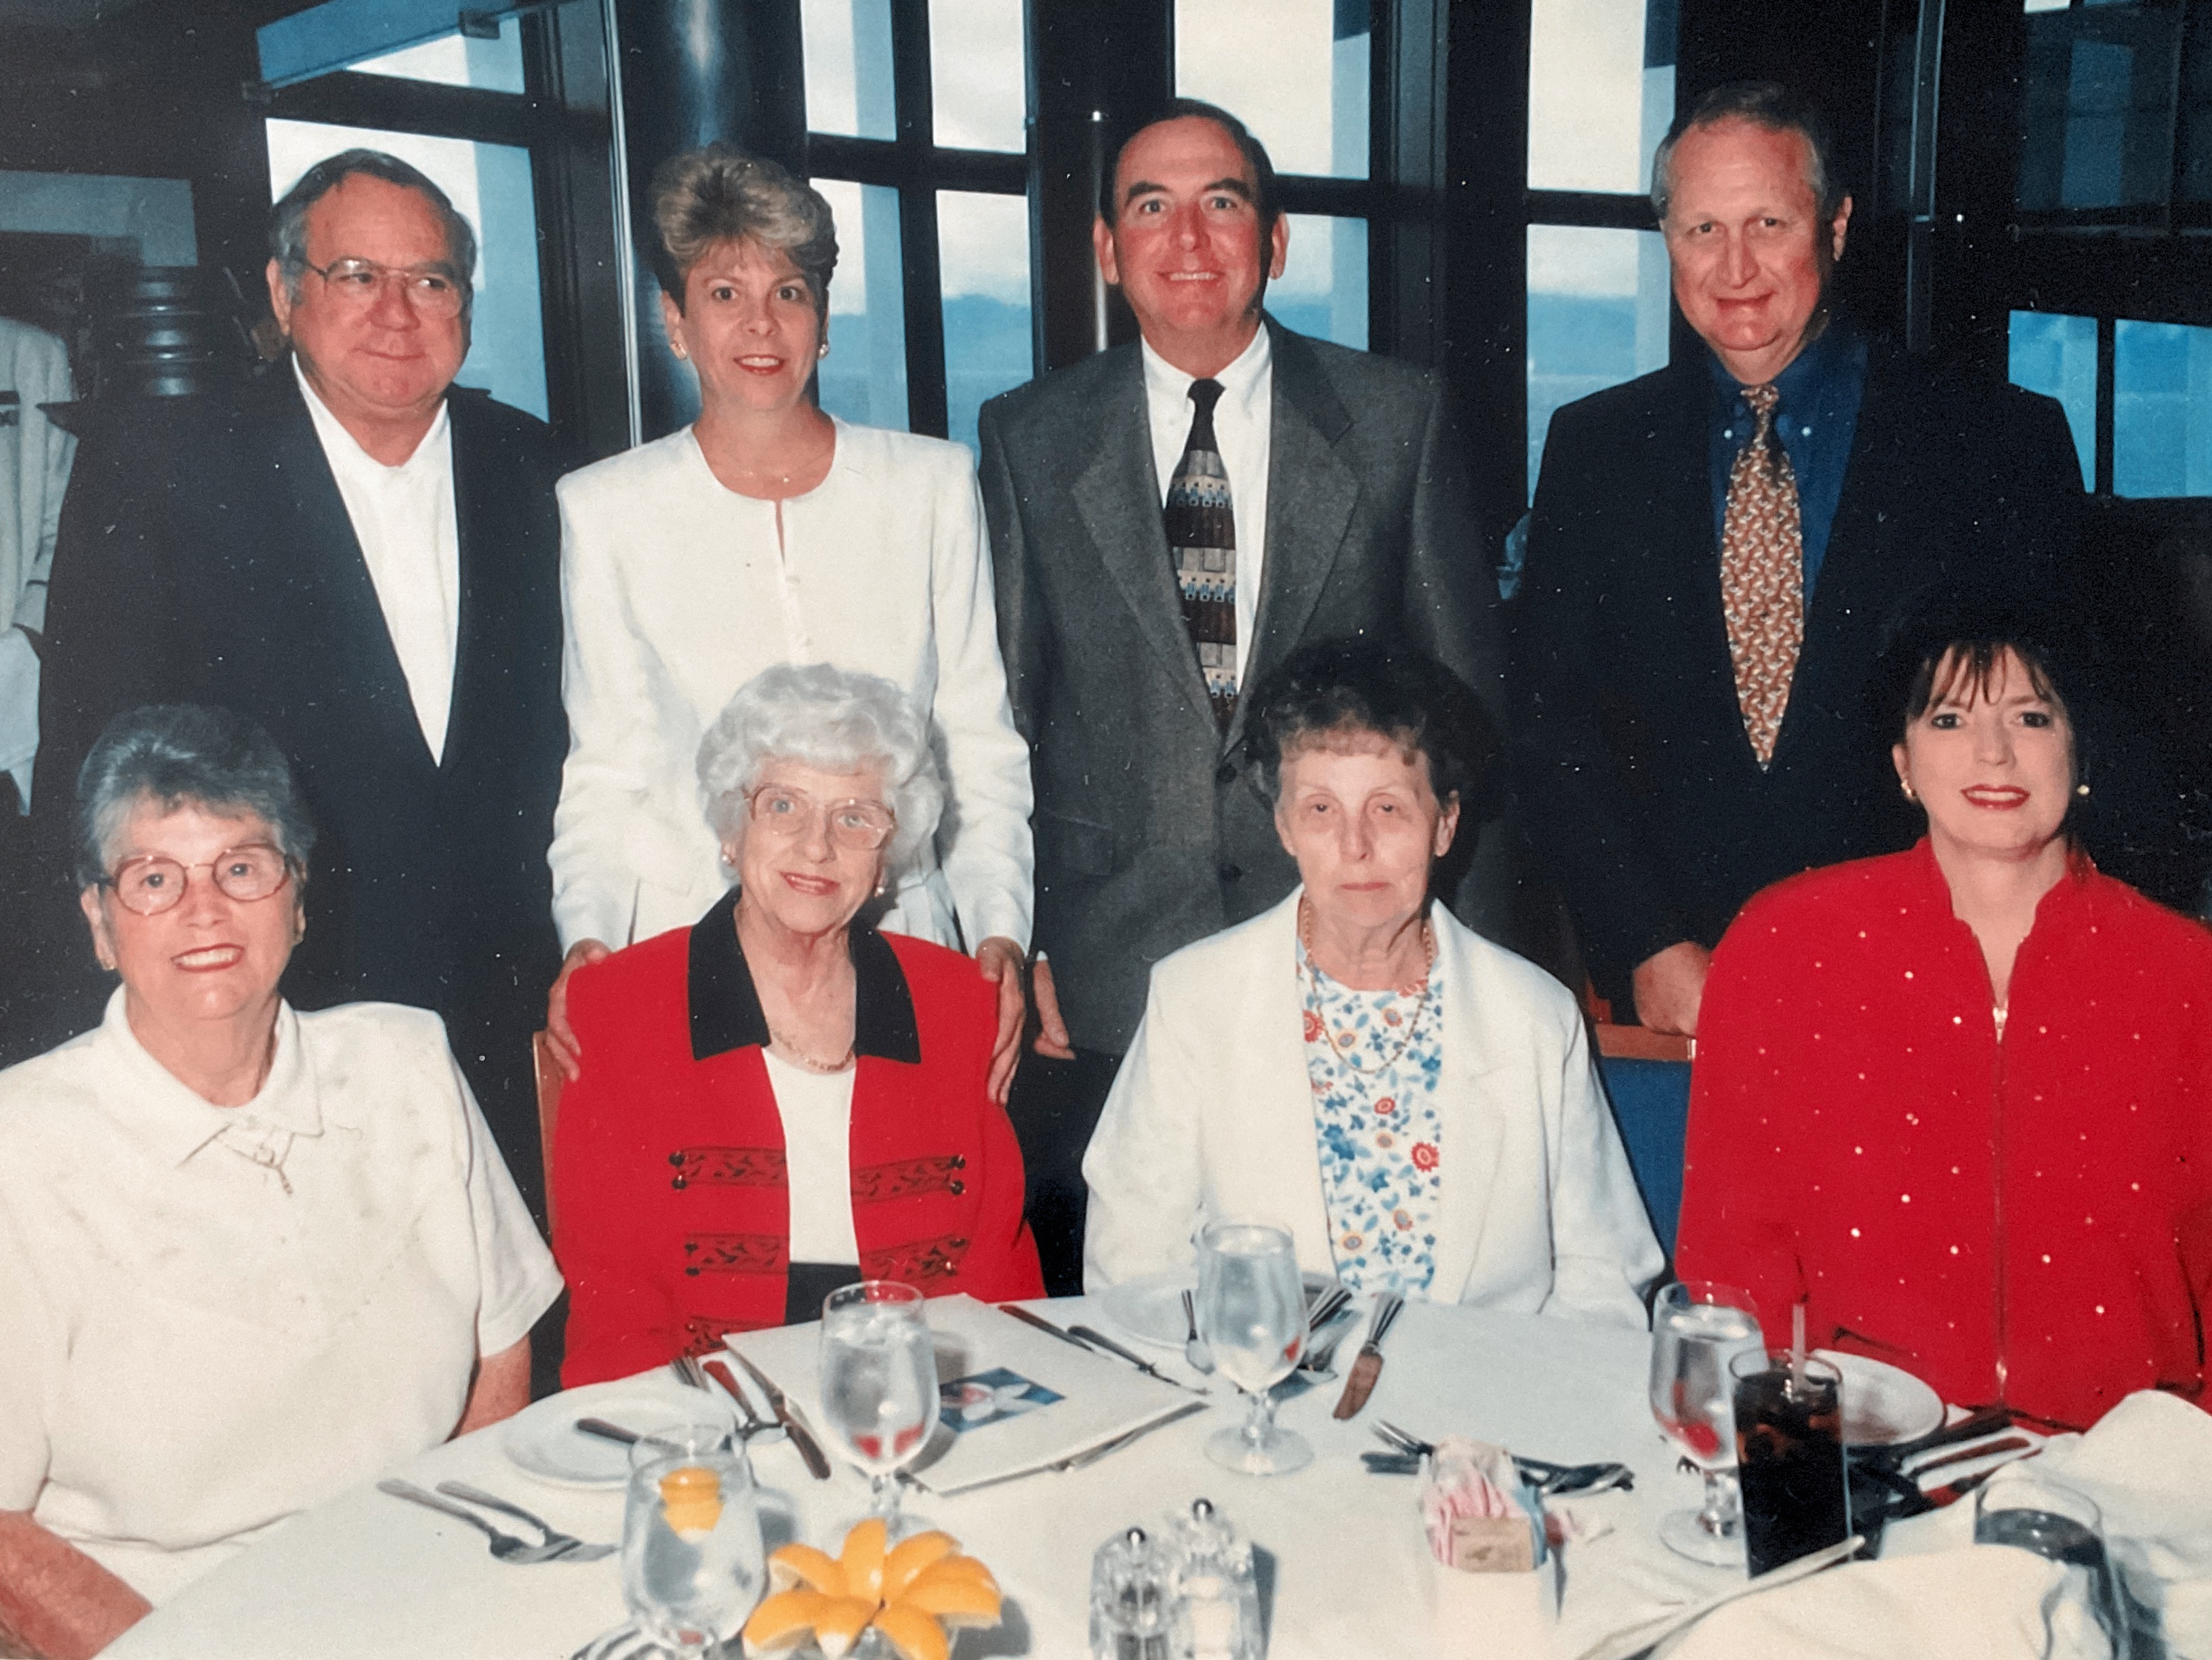 Alaskan Cruise, July, 1999.  Celebrating Jan and Ray's 30th Anniversary with family and friends…